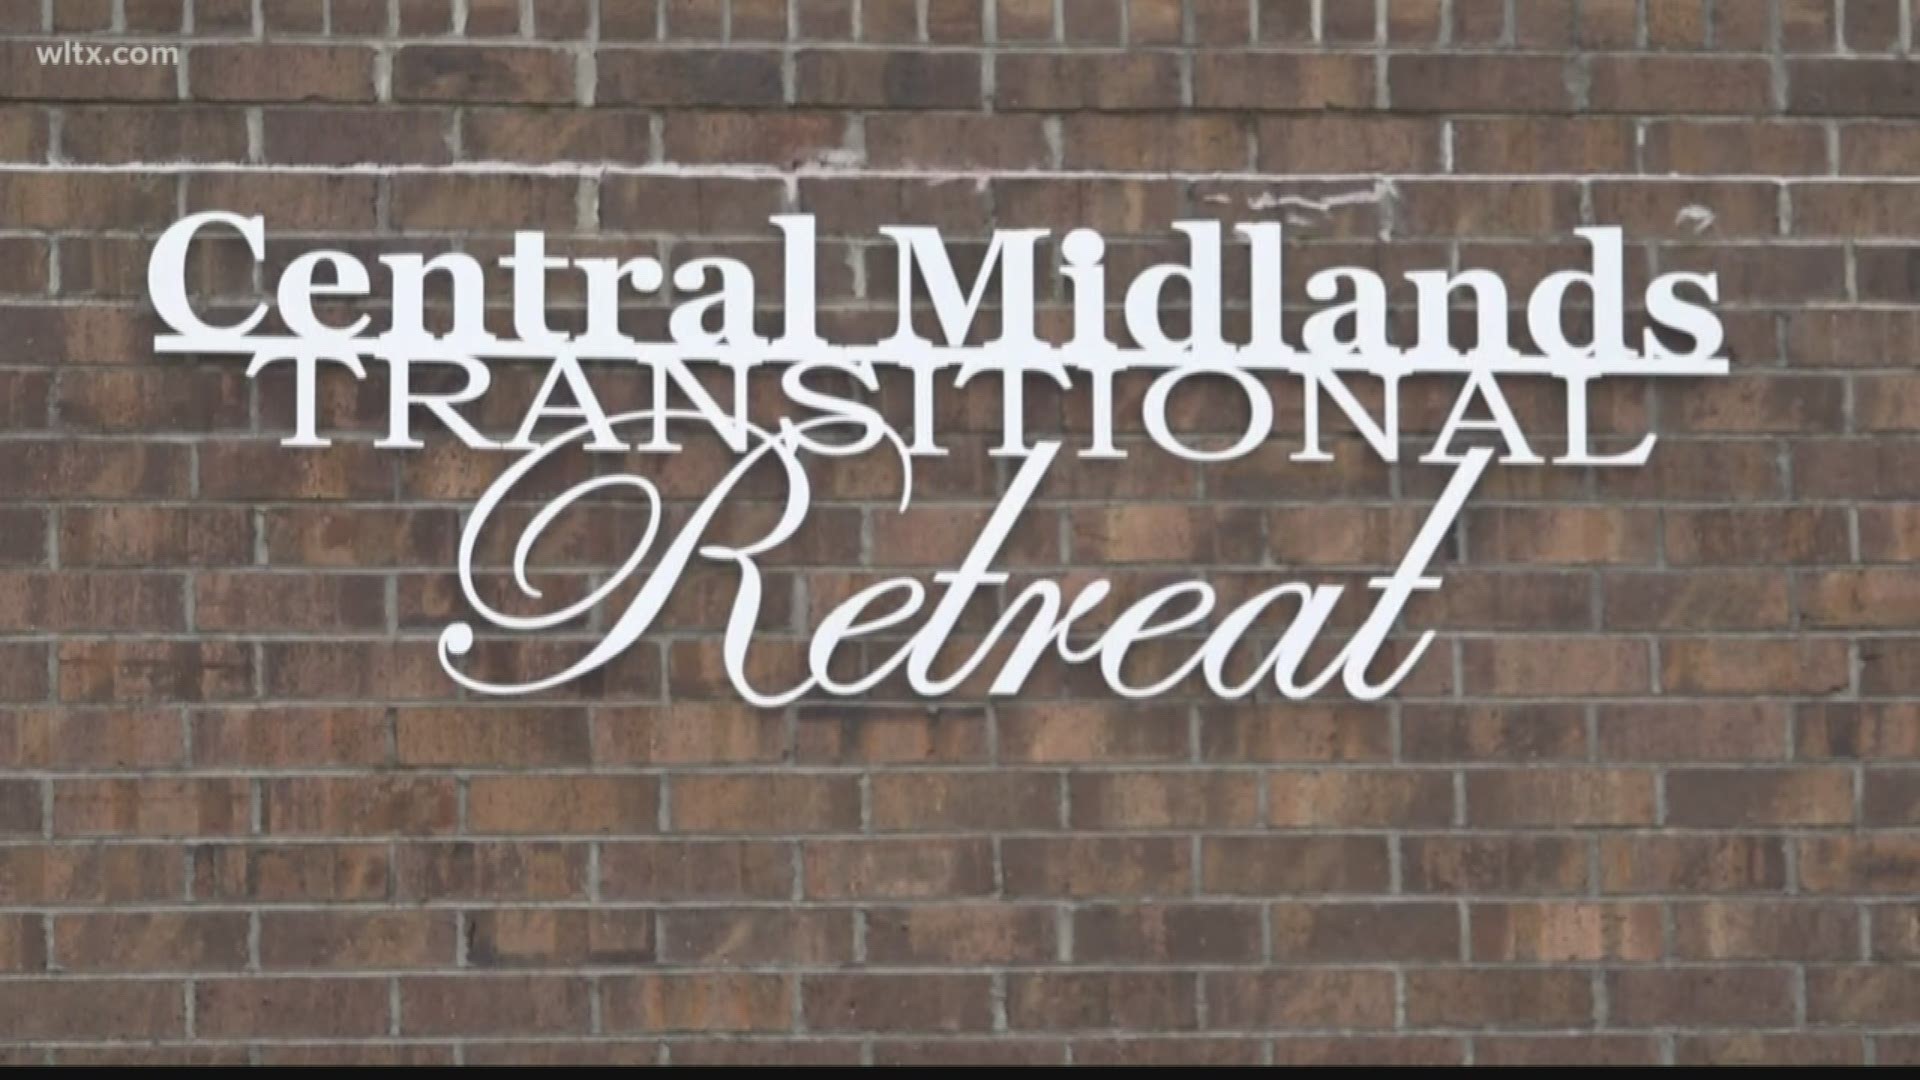 Central Midlands Transitional Retreat is helping veterans get back on their feet.